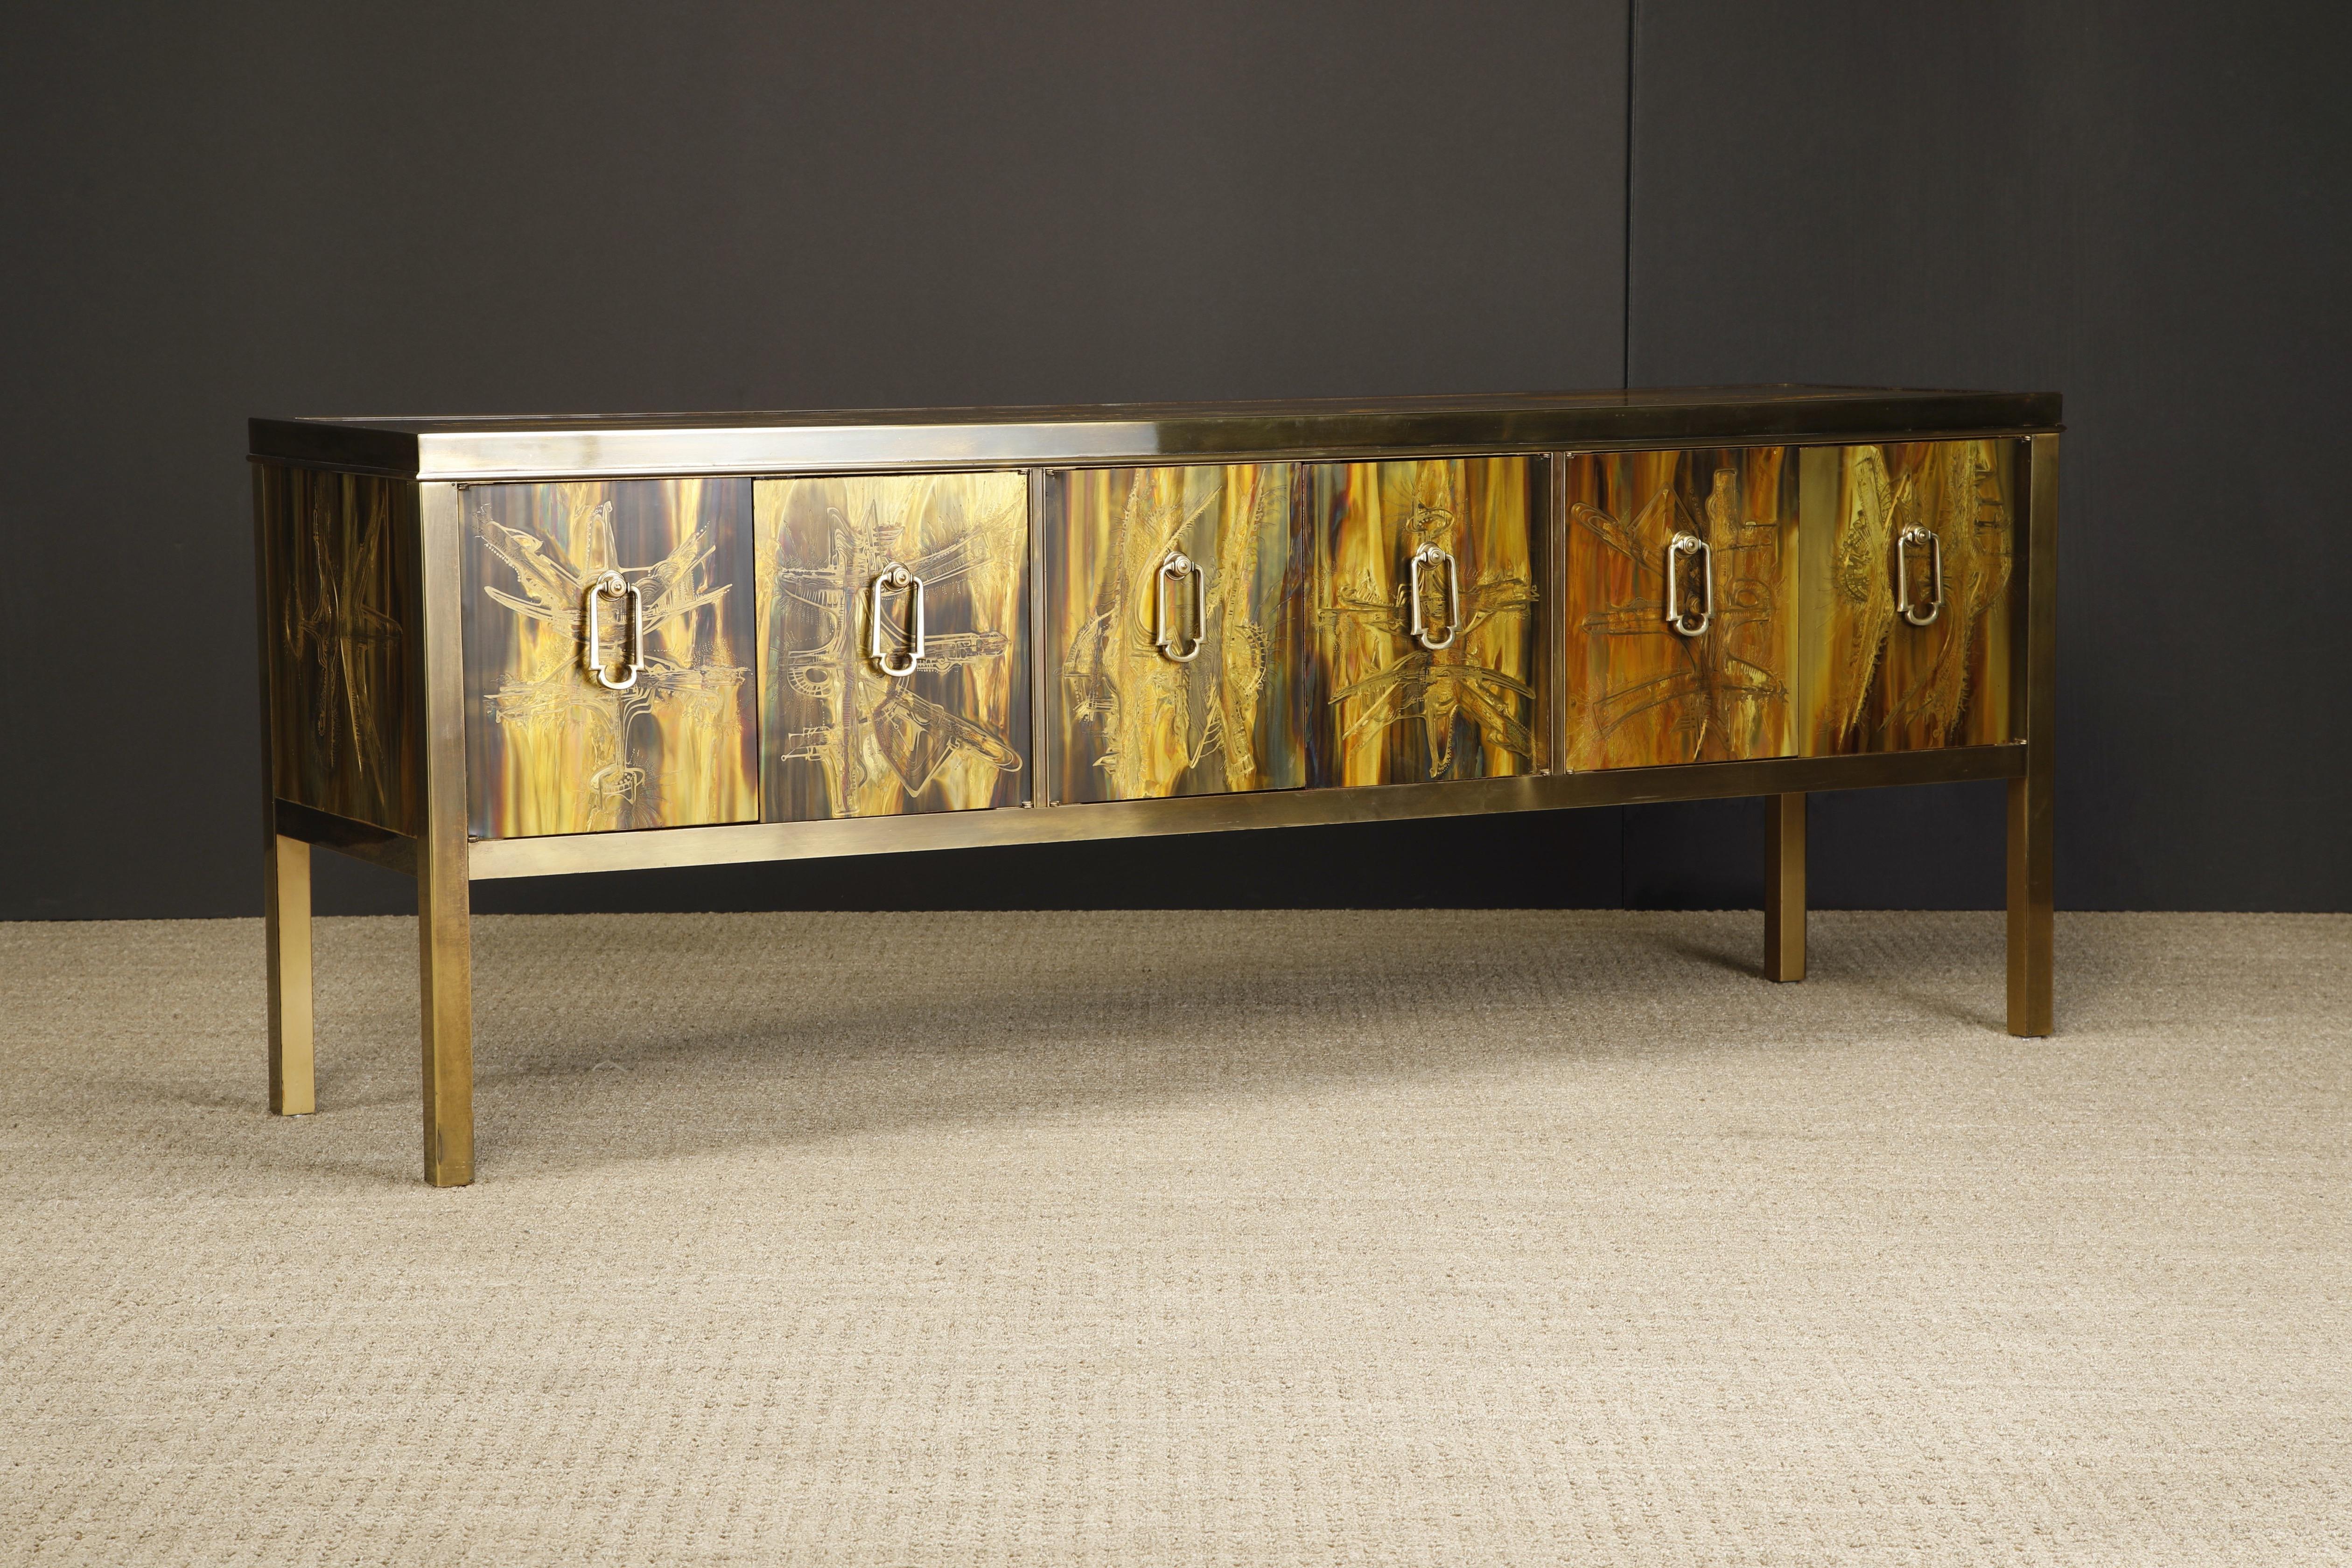 This mesmerizing acid etched brass console cabinet was designed by Bernhard Rohne and produced by Mastercraft in the 1970s. Exquisite acid-etched artwork on the top, sides and front door panels with patinated brass trim and legs. Six doors and door